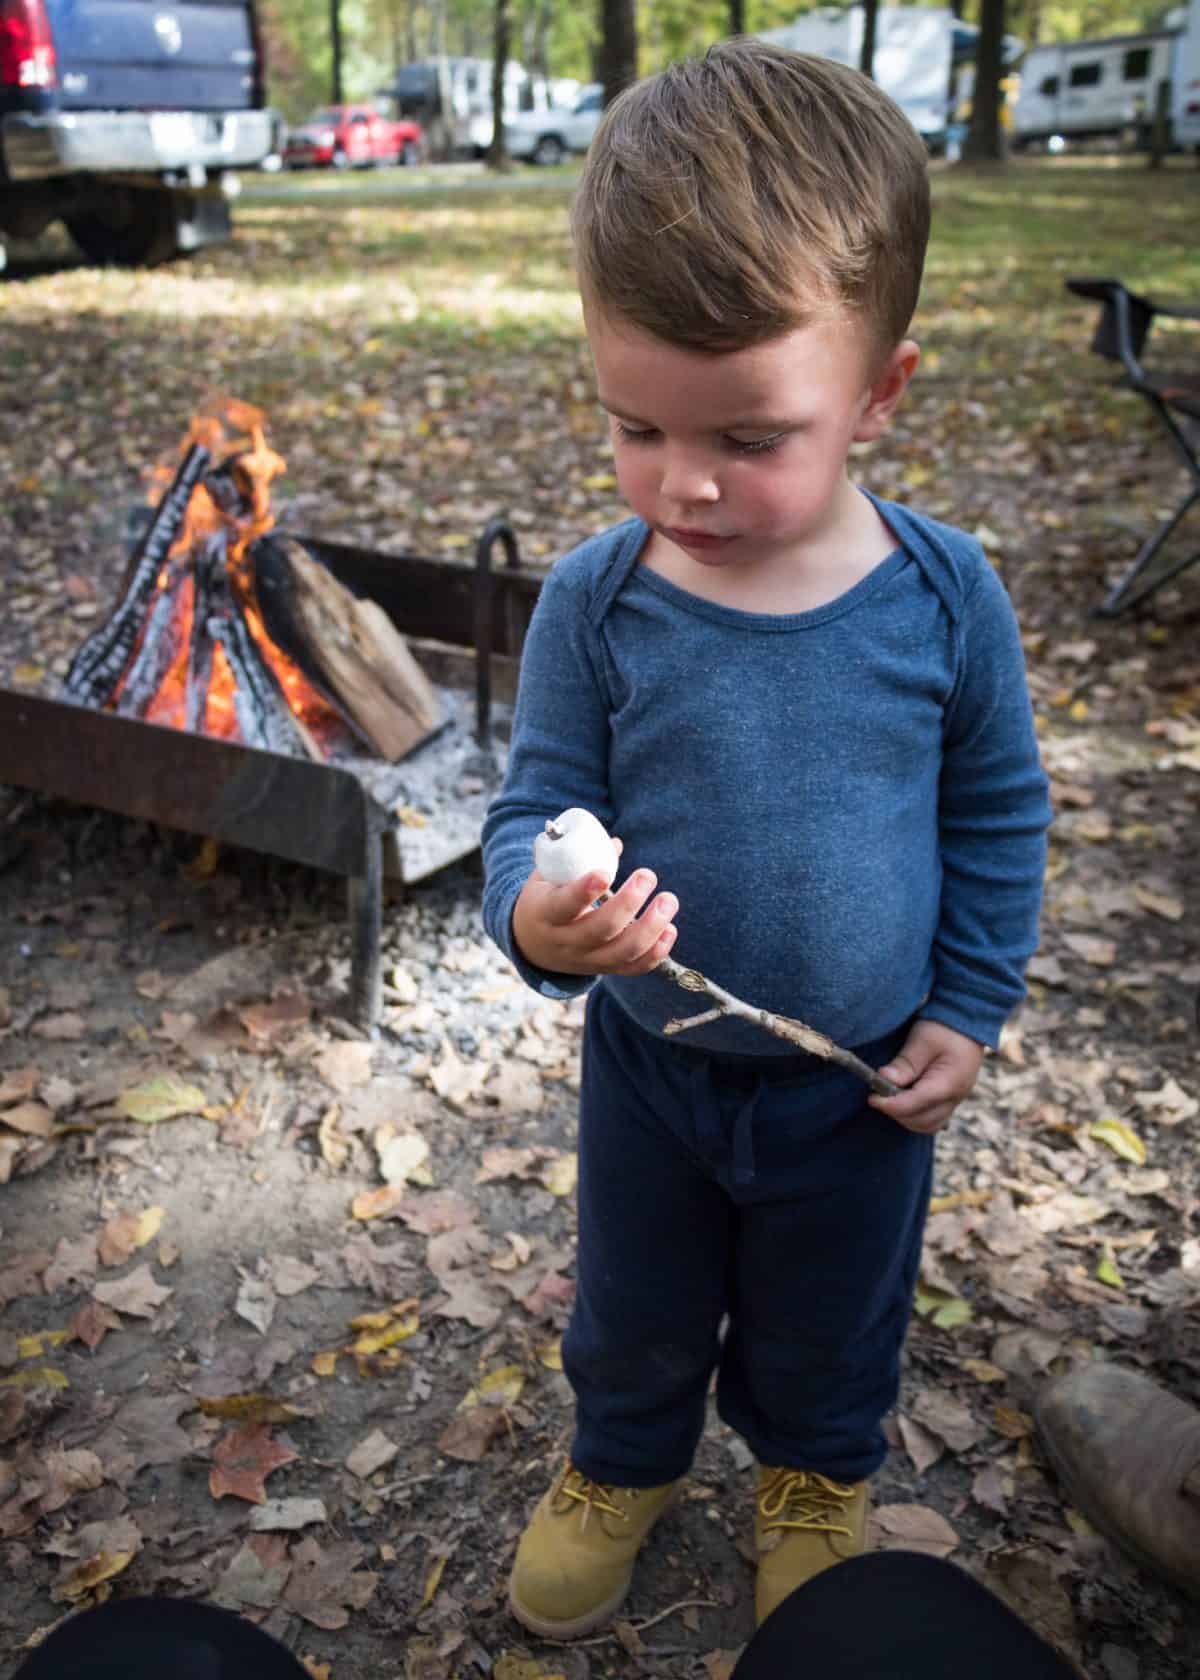 Child with Marshmallow on a stick